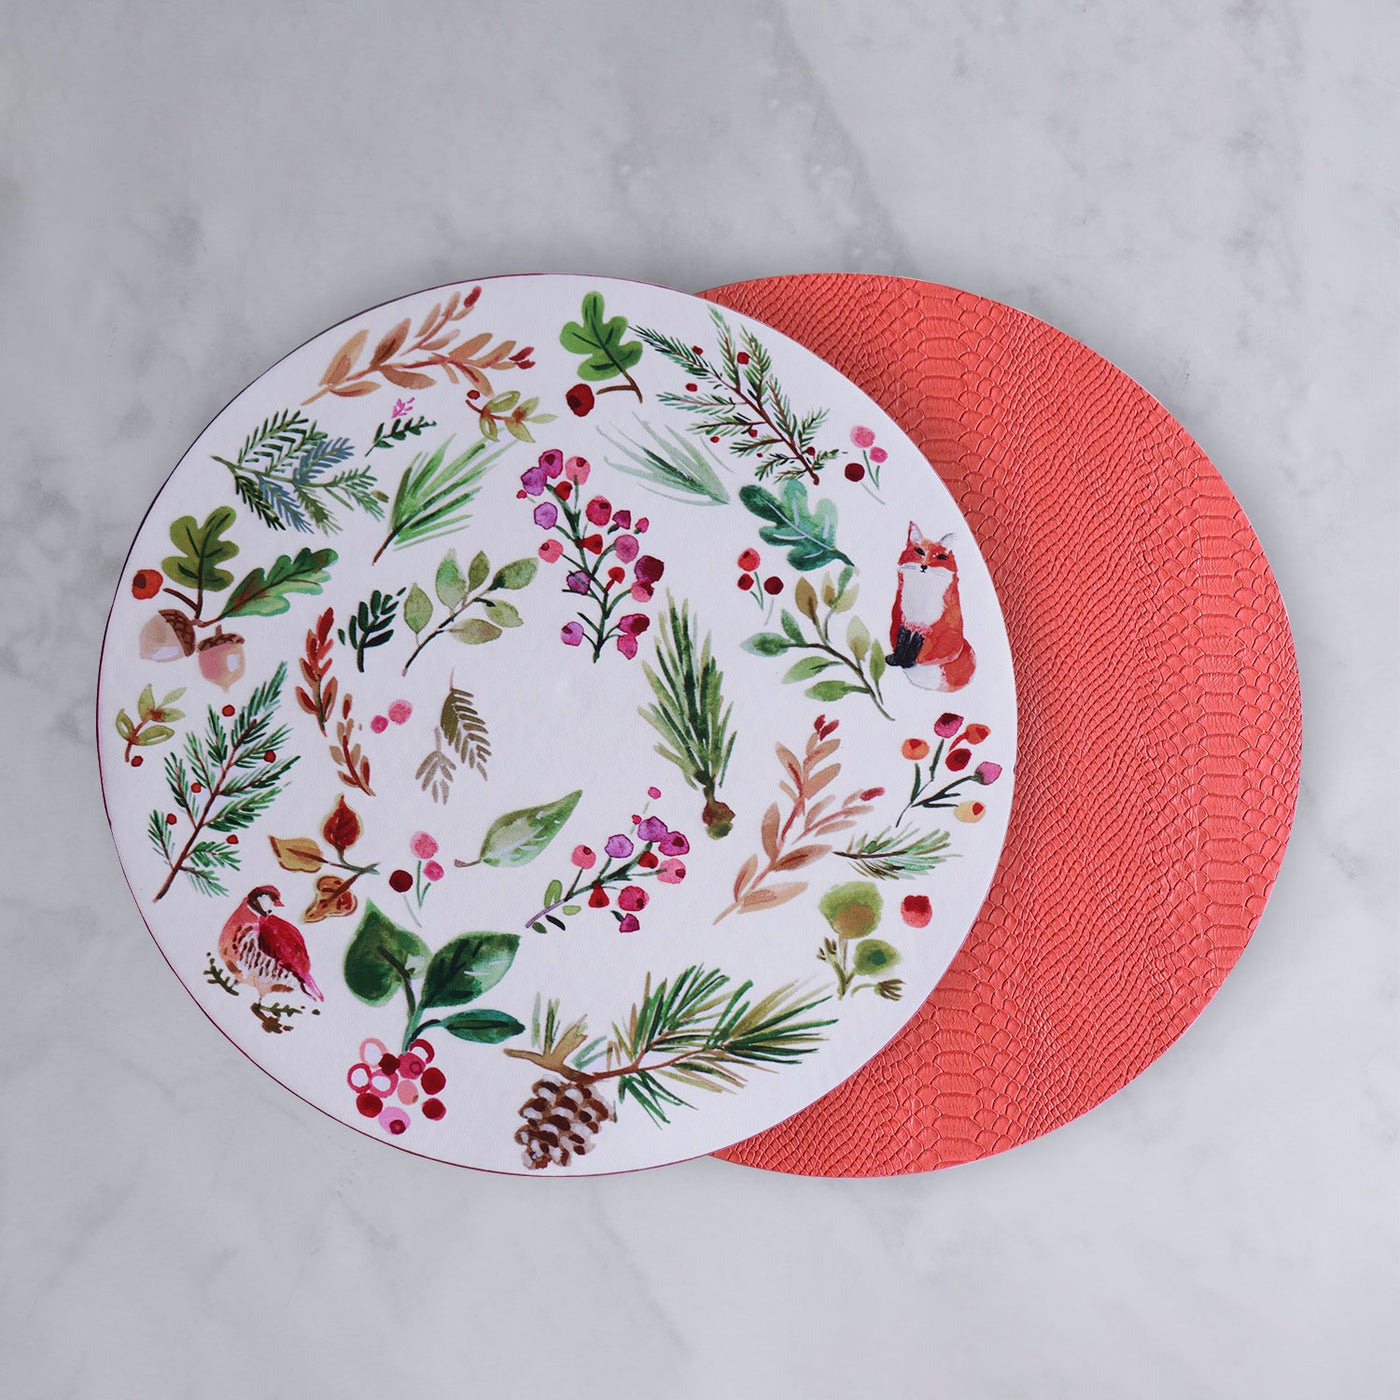 Beatriz Ball Vida Happy Christmas Reversible 16" Round Placemats Set of 4-HOME/GIFTWARE-Kevin's Fine Outdoor Gear & Apparel